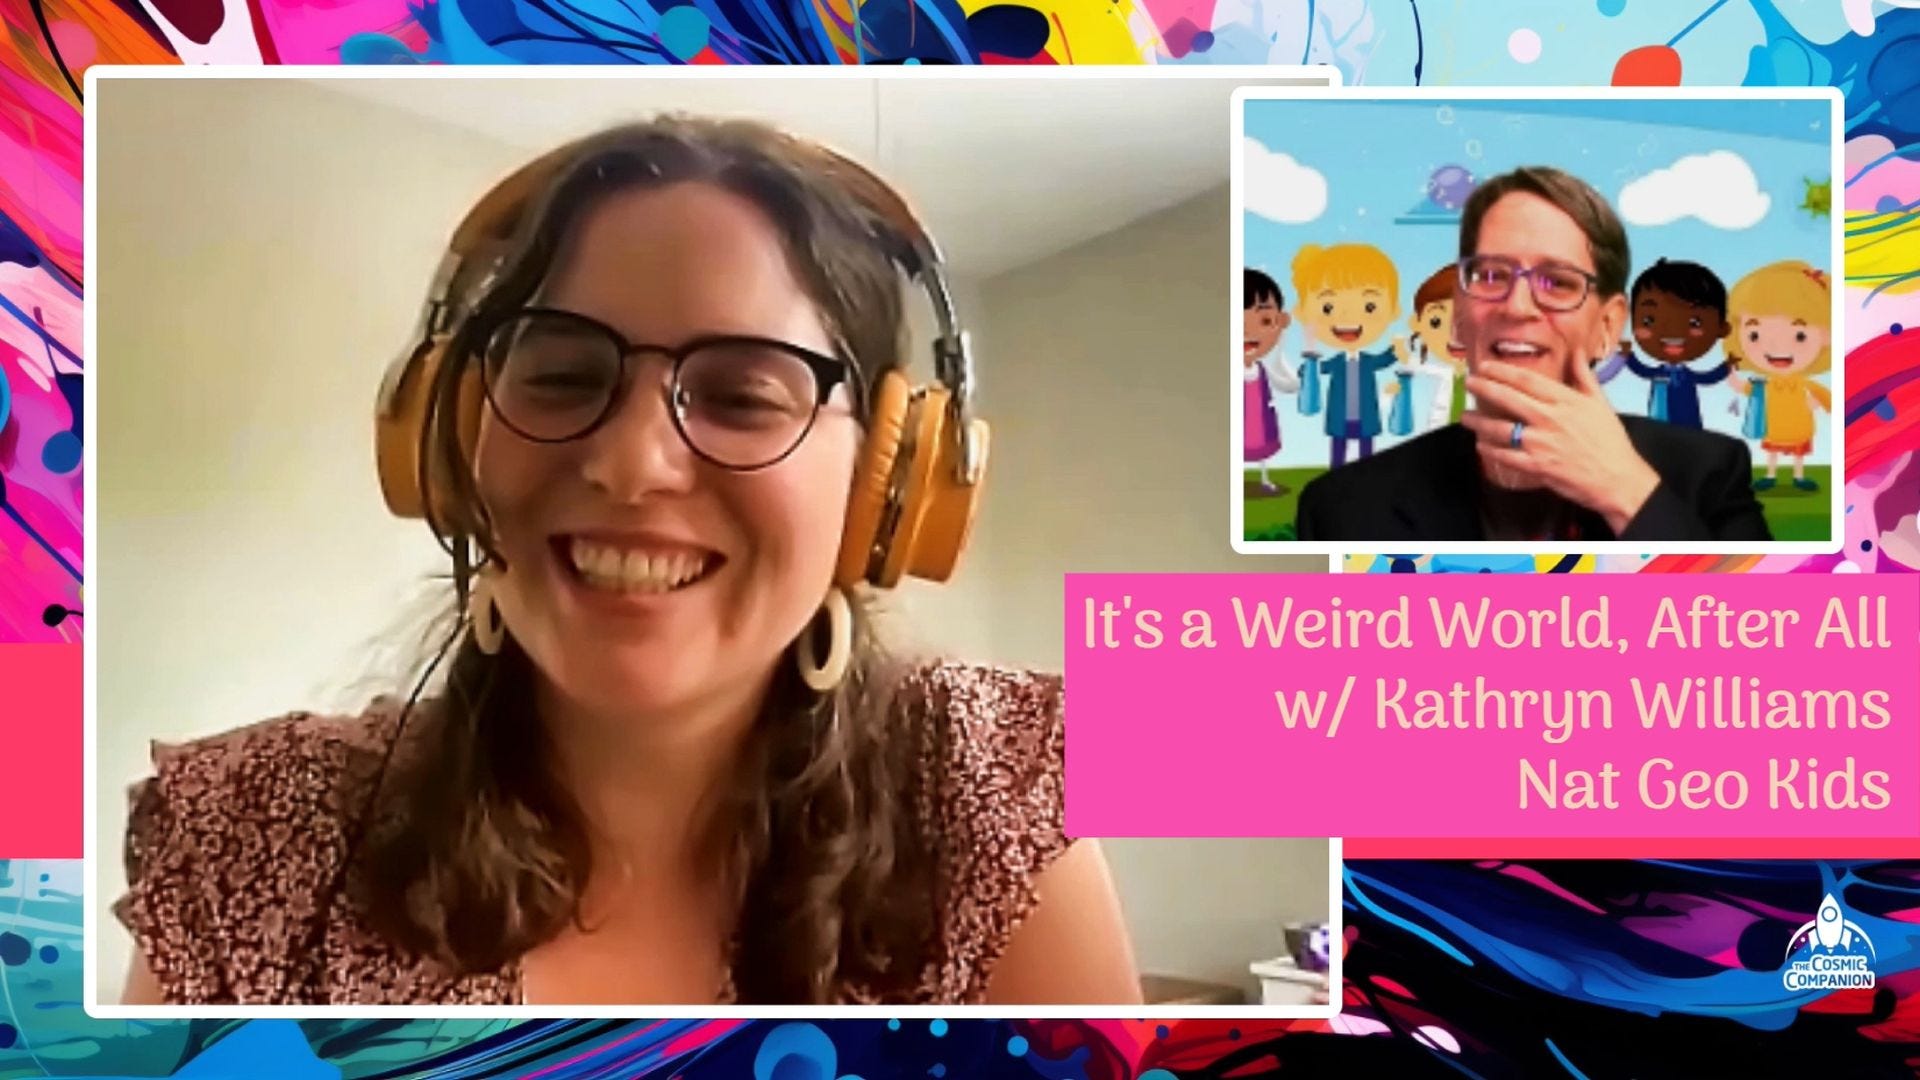 It's a Weird World, After All! with Kathryn Williams, Nat Geo Kids